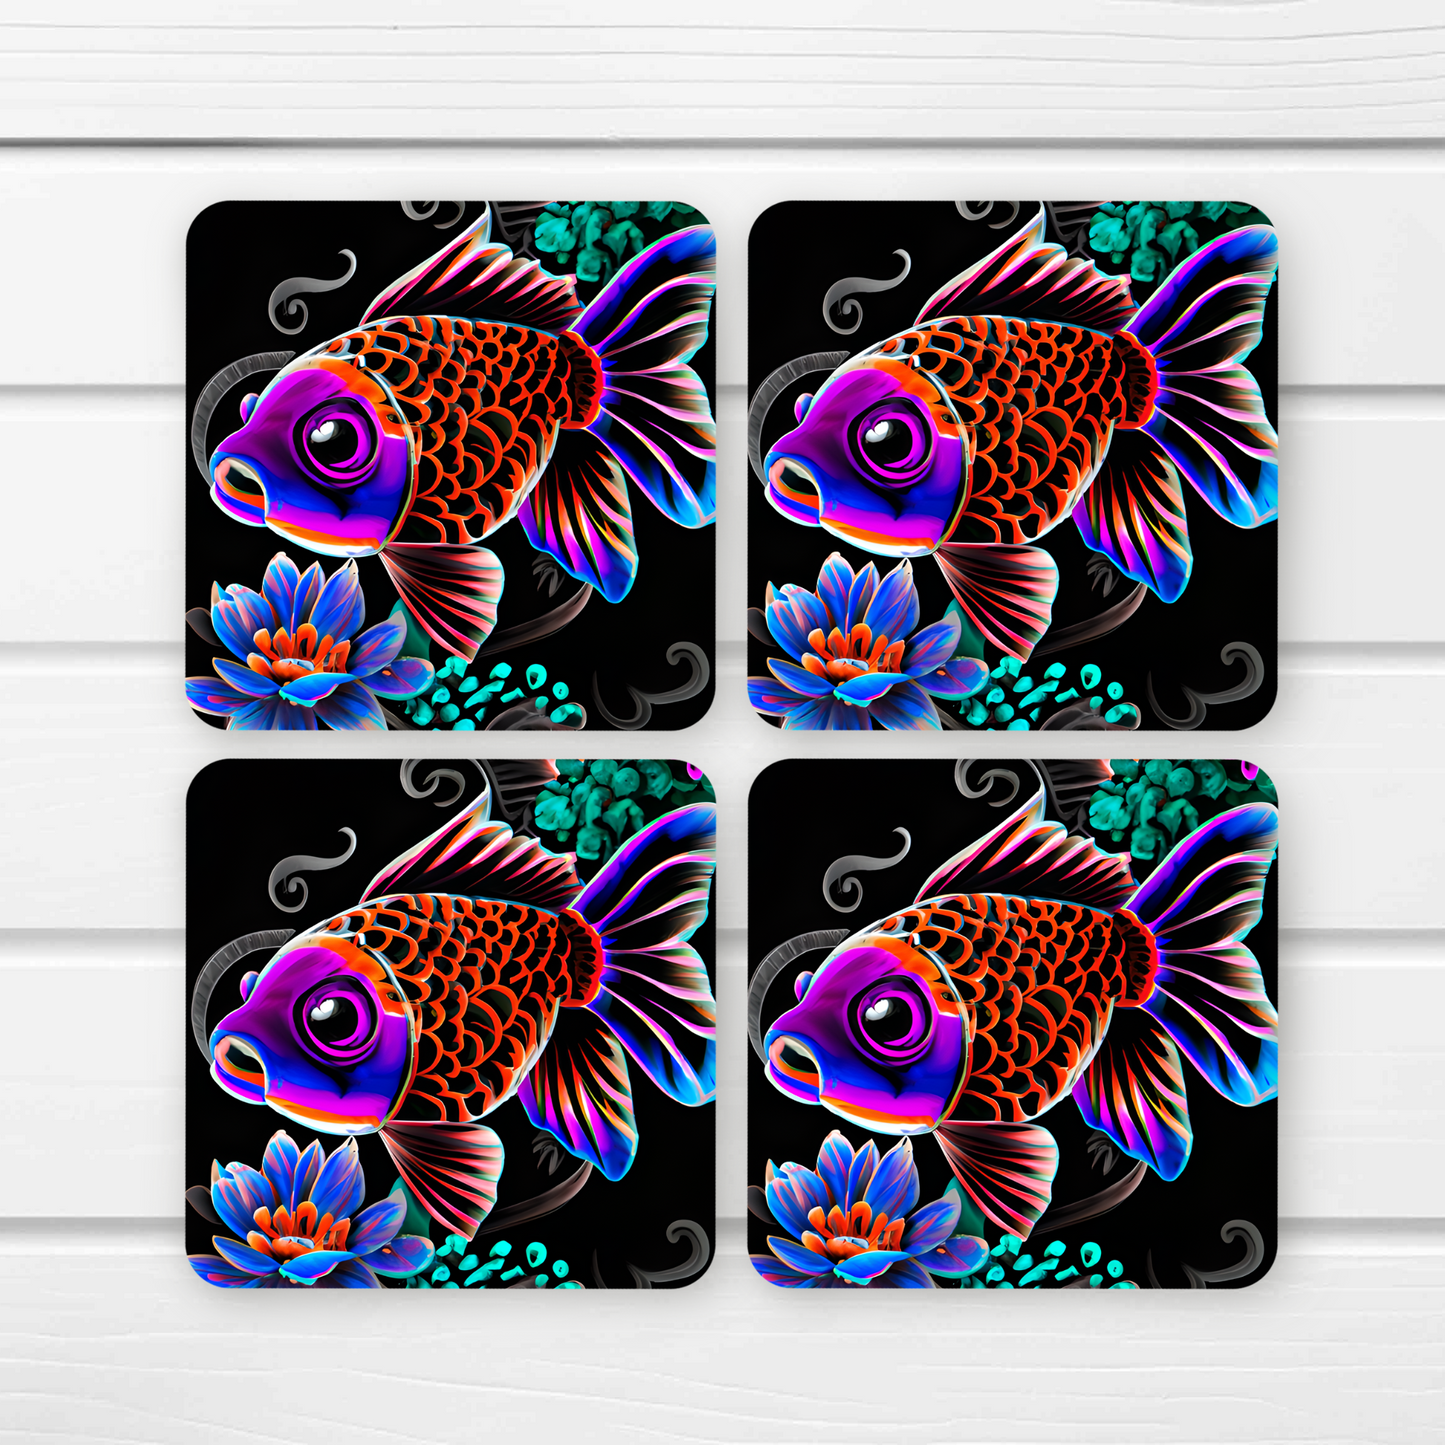 Beautifully Printed Colourful Fish wooden Coasters for Stylish Home Décor